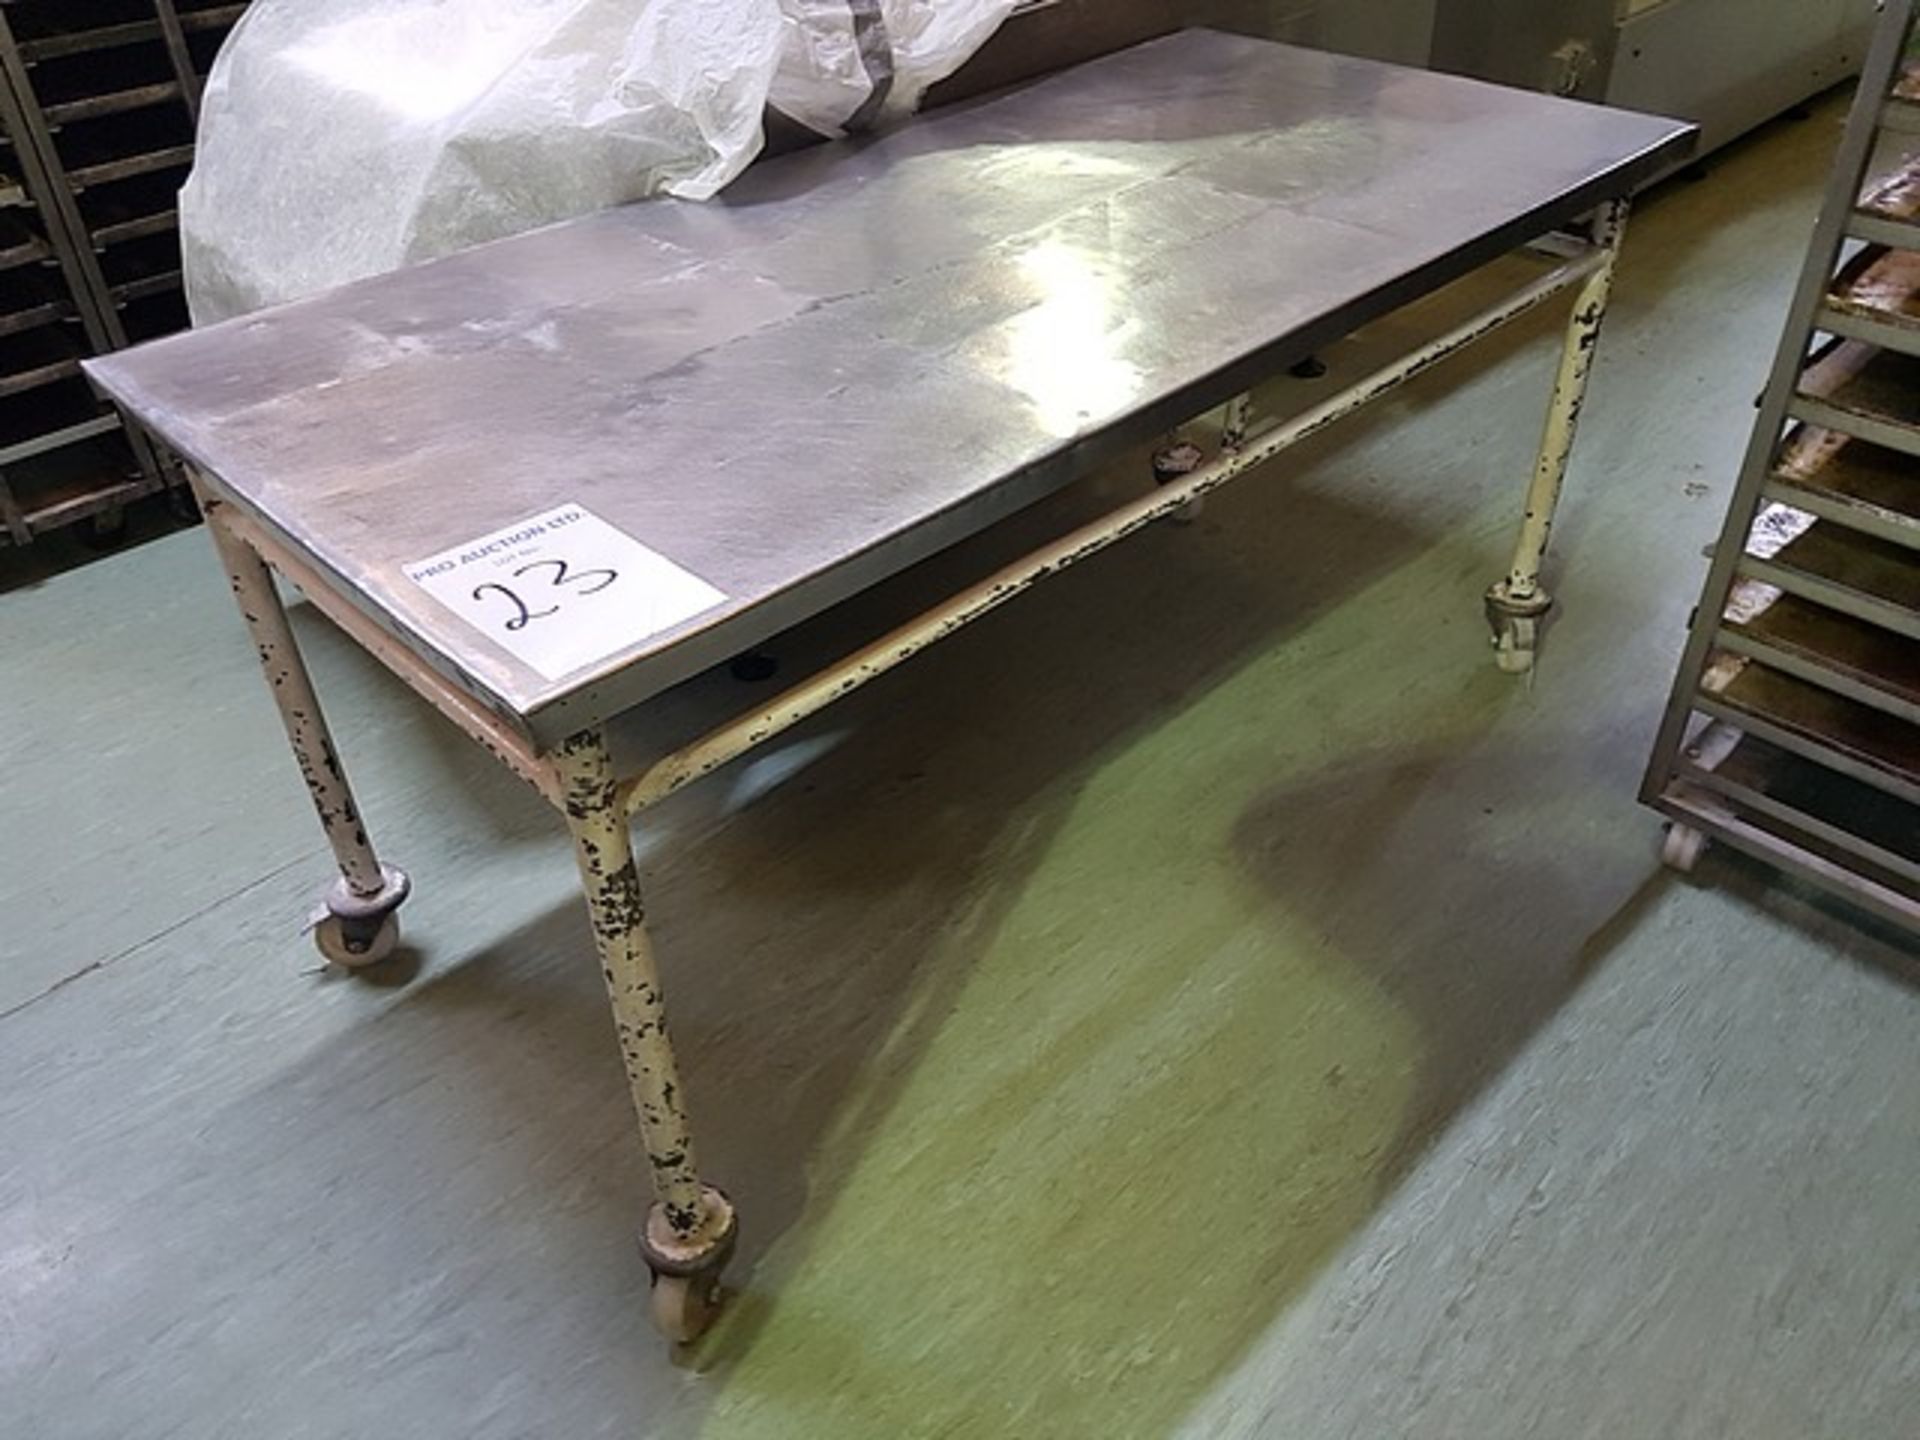 Stainless steel preparation table with upstand 1660mm x 910mm